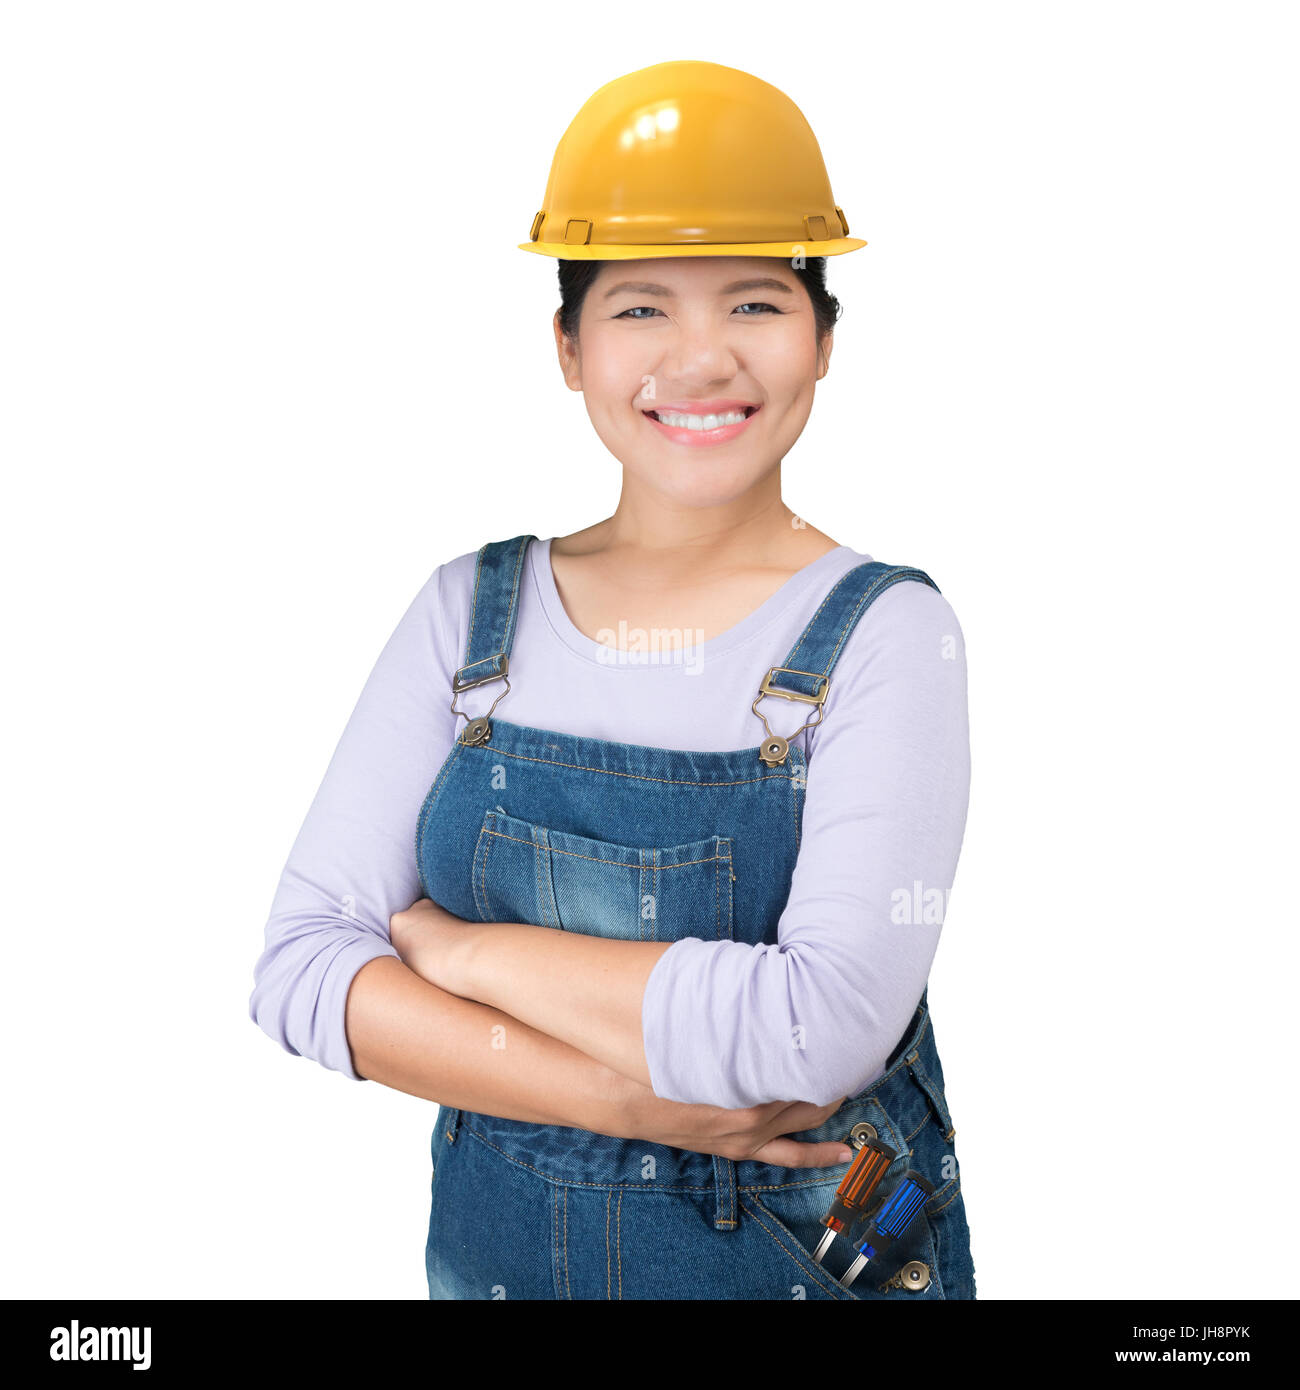 Asian engineer or foreman wearing safety vest & hard hat Stock Photo - Alamy